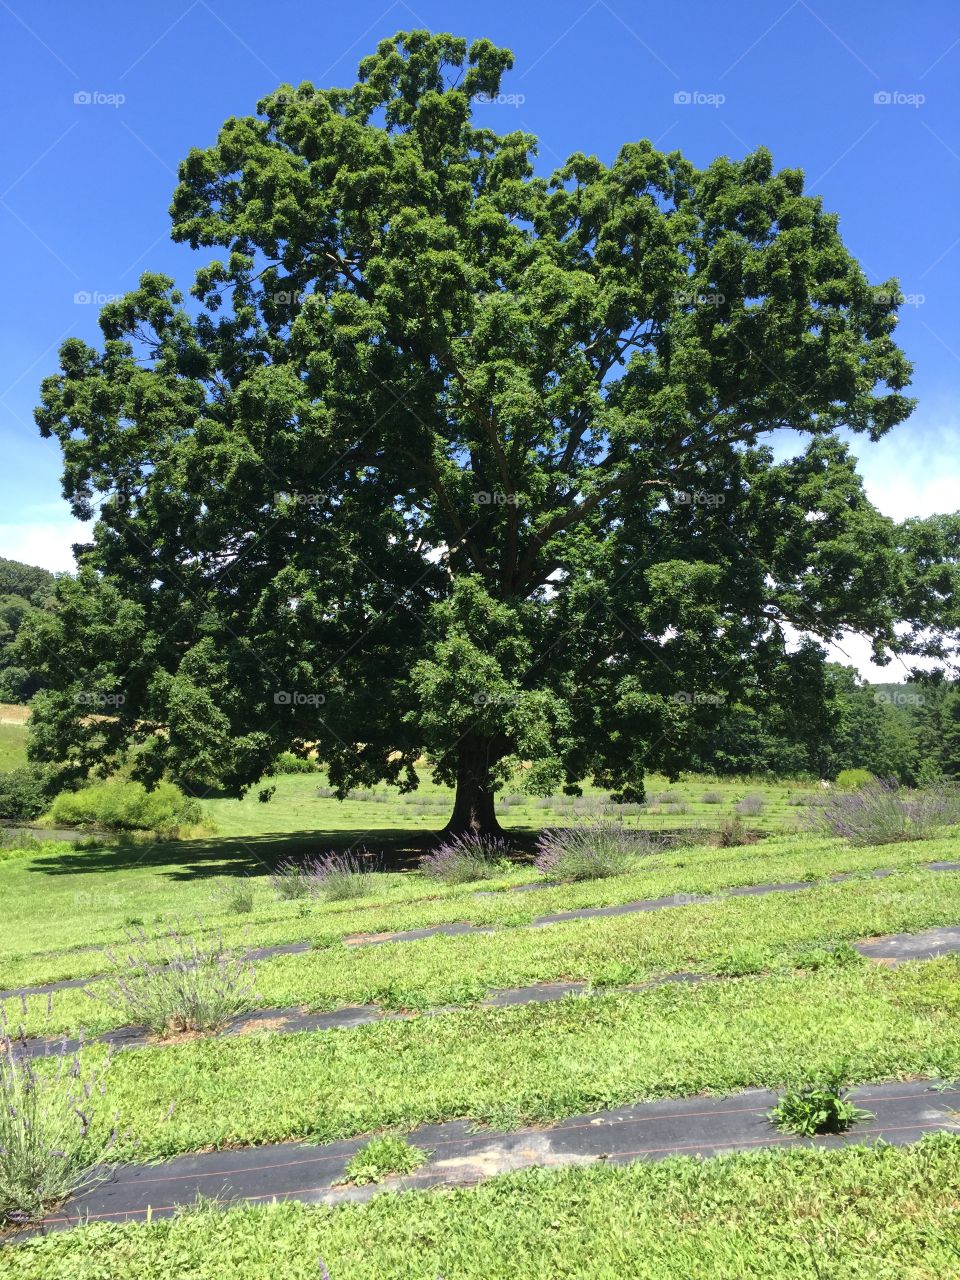 Large tree keeping watch over a lavender farm